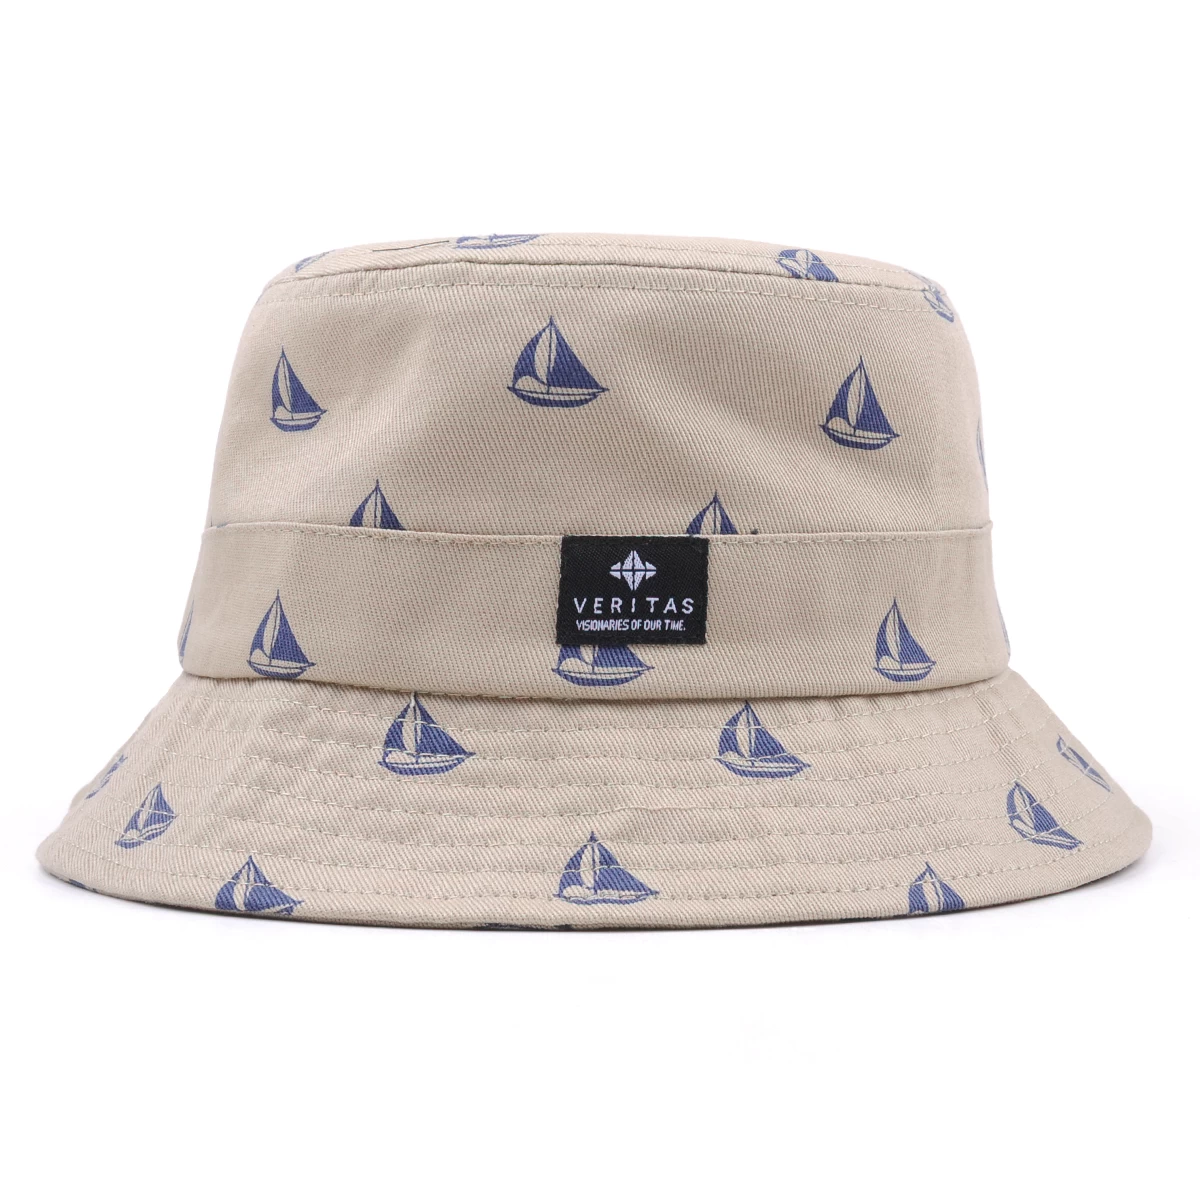 Velcro closure floral bucket hat China Supplier